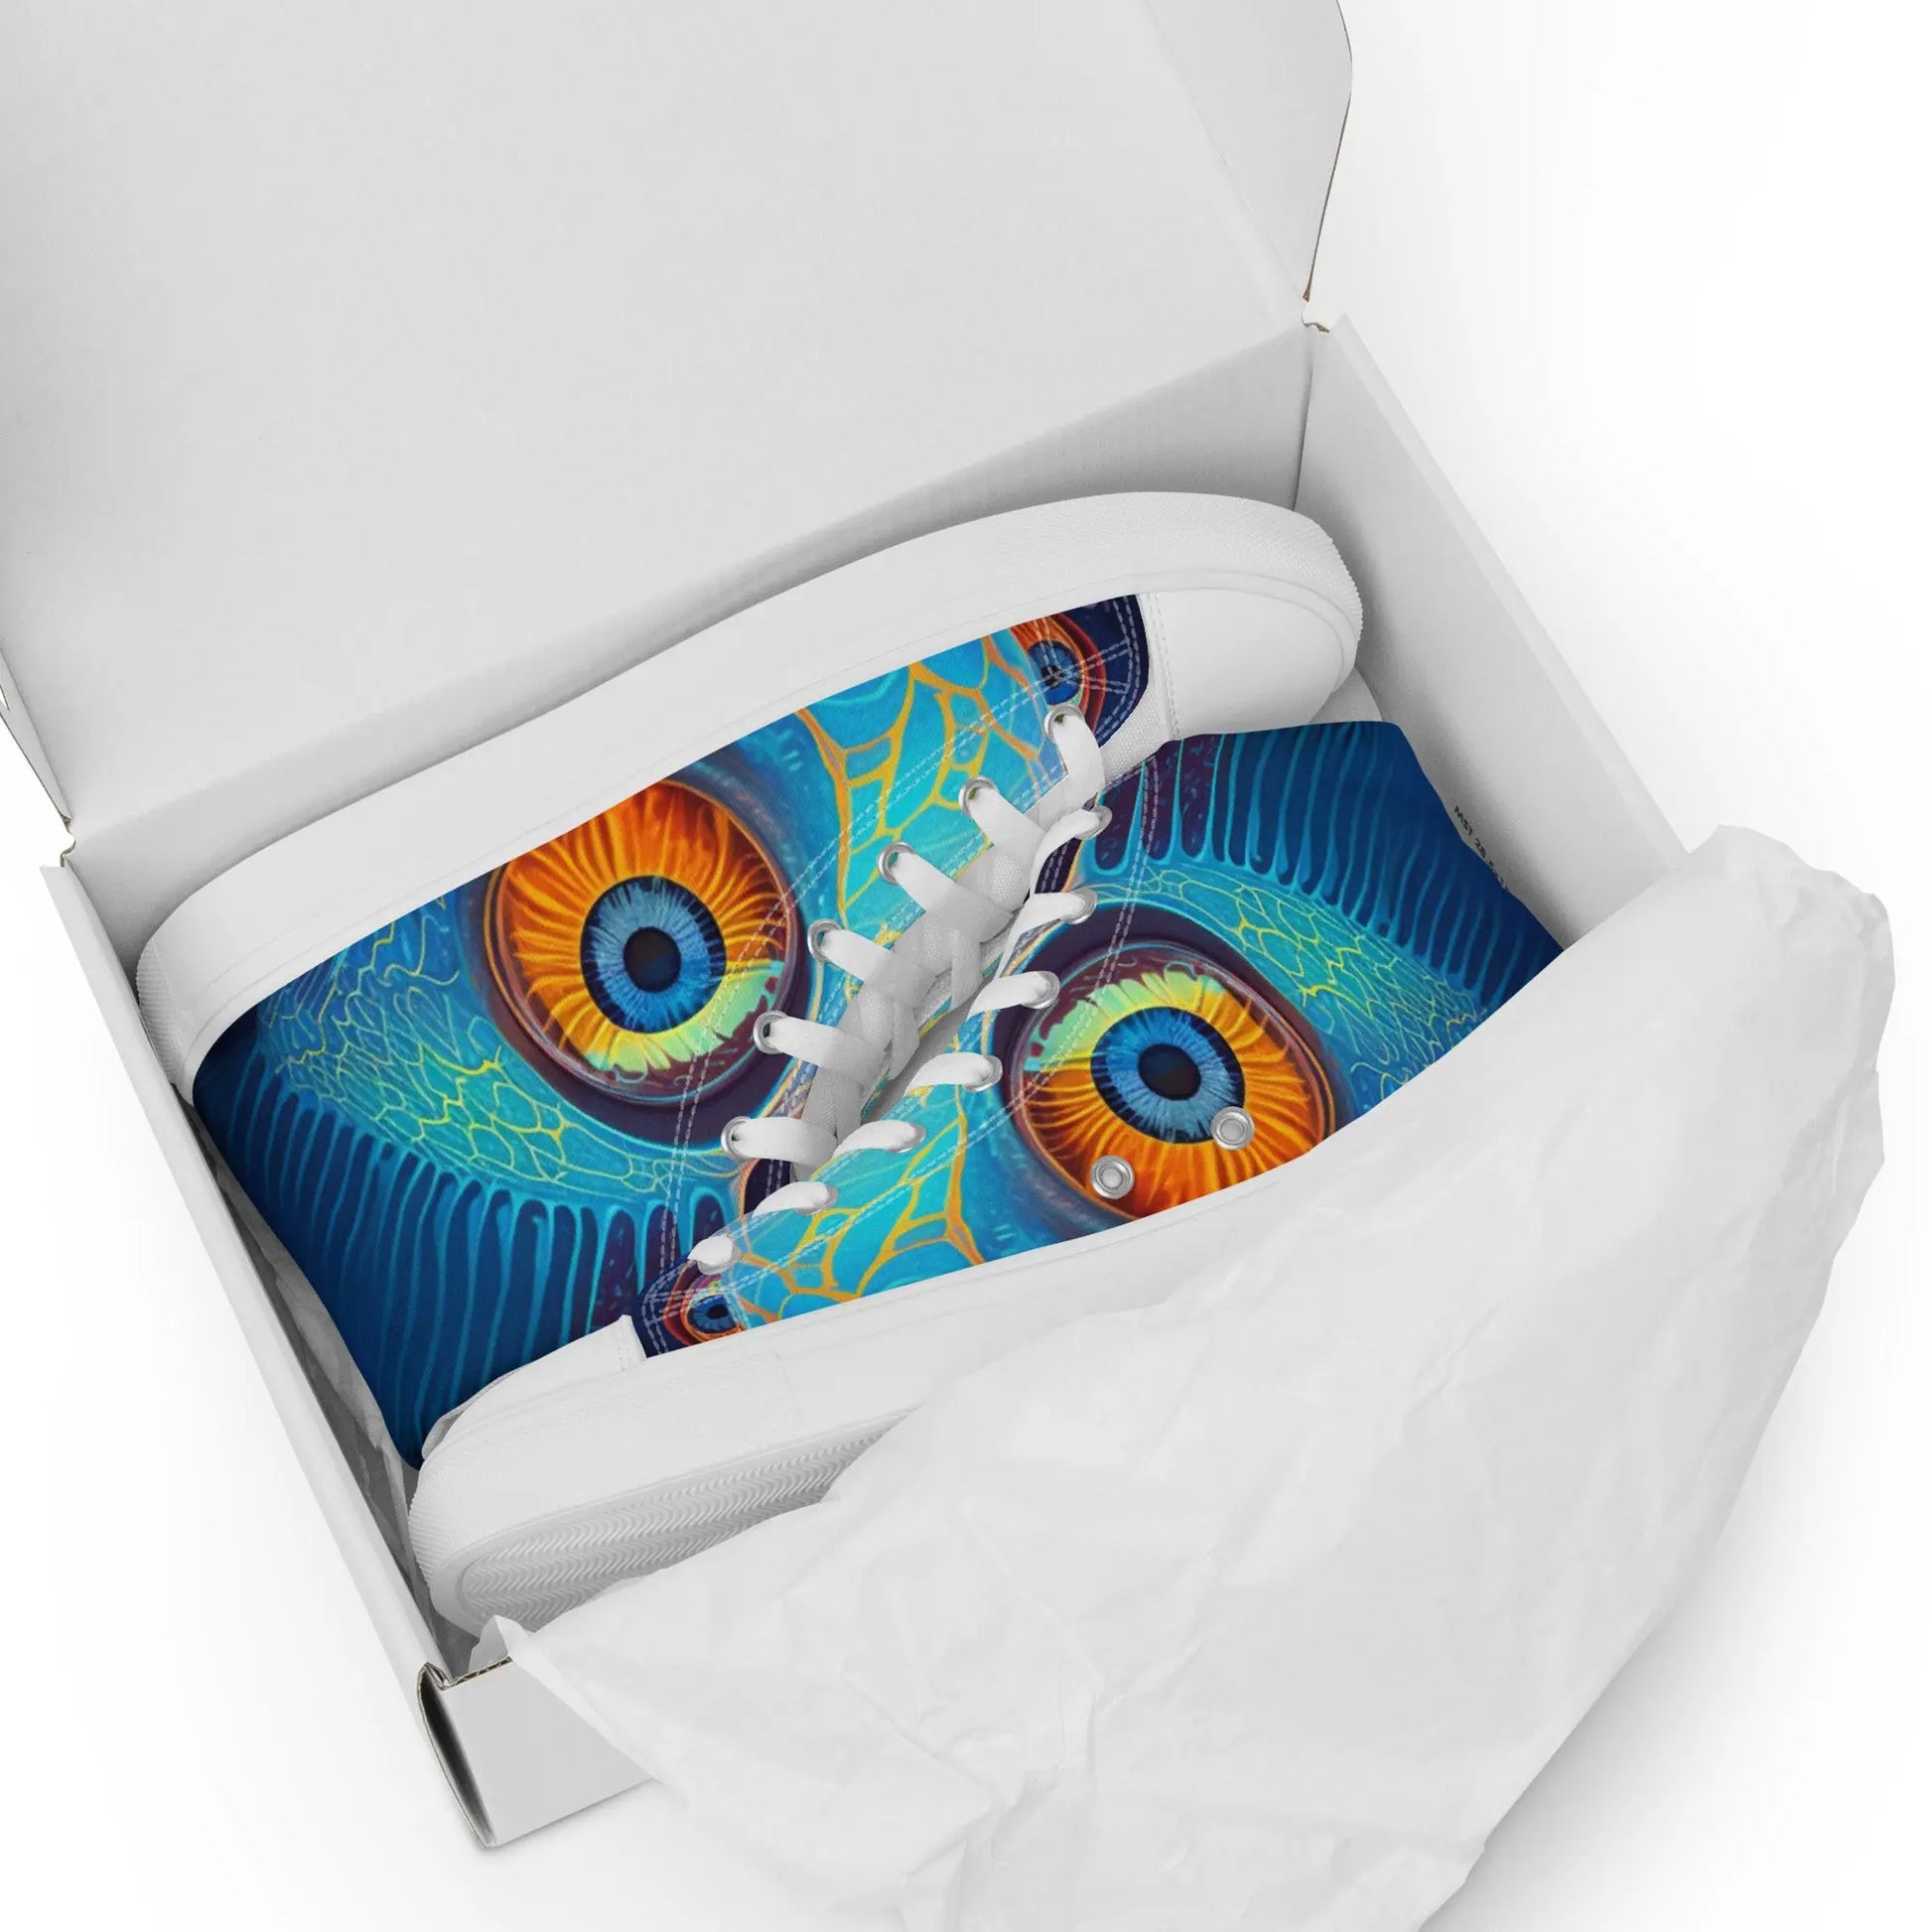 Futuristic Fauvism Blue Fish High Top Sneakers: AI-Engineered, Unisex, Style and Comfort with Durable, Art-Inspired, SeaLife, Animal Print Design Kinetic Footwear